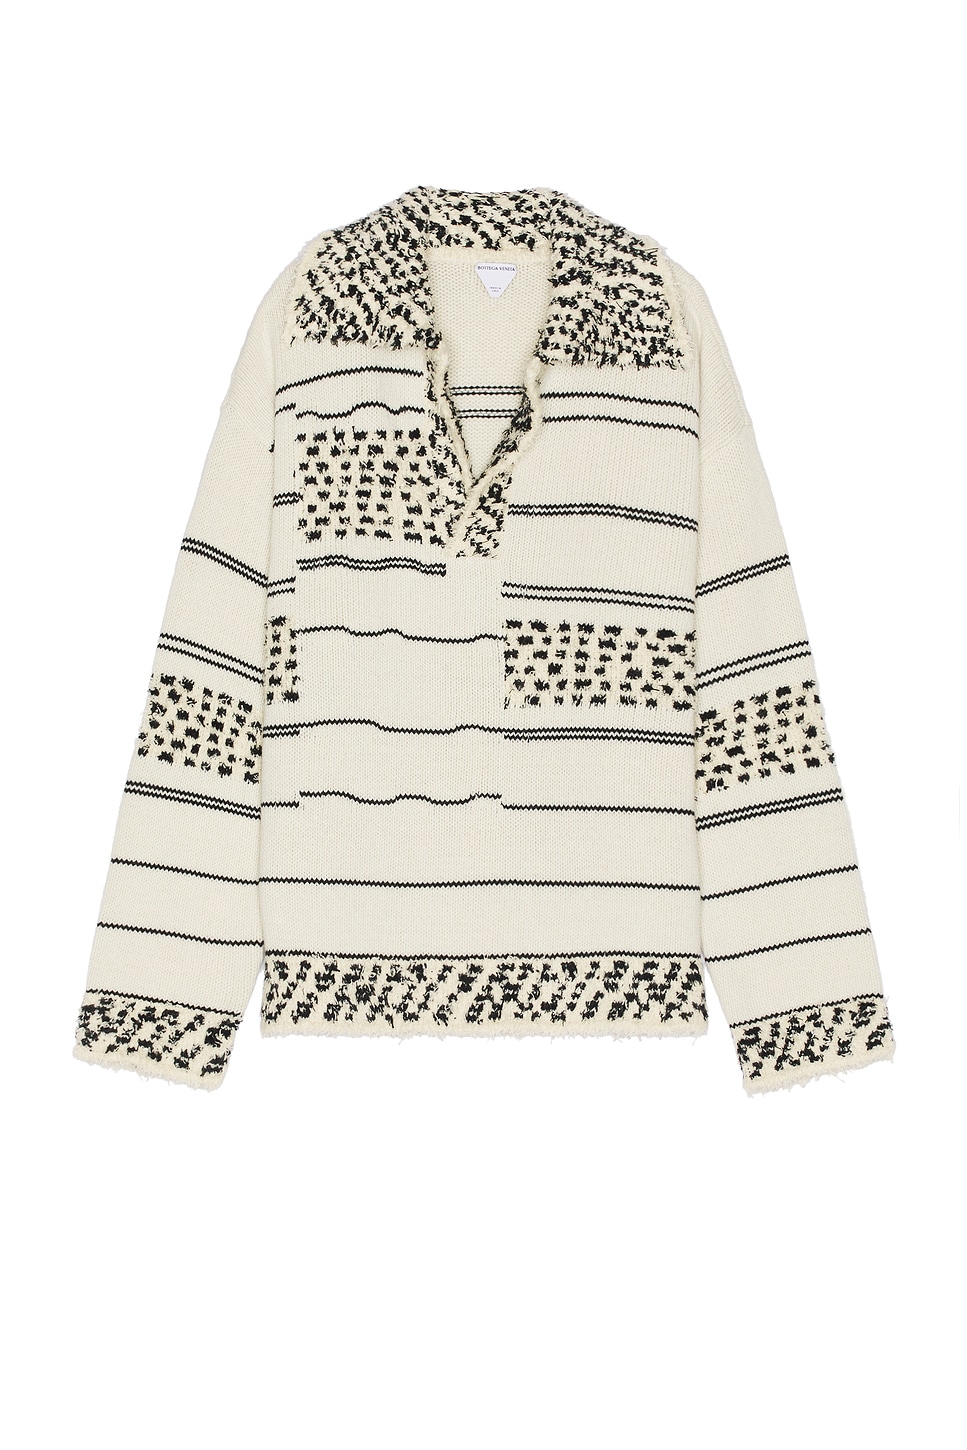 Mw Textured Stripe Knit Sweater in Ivory